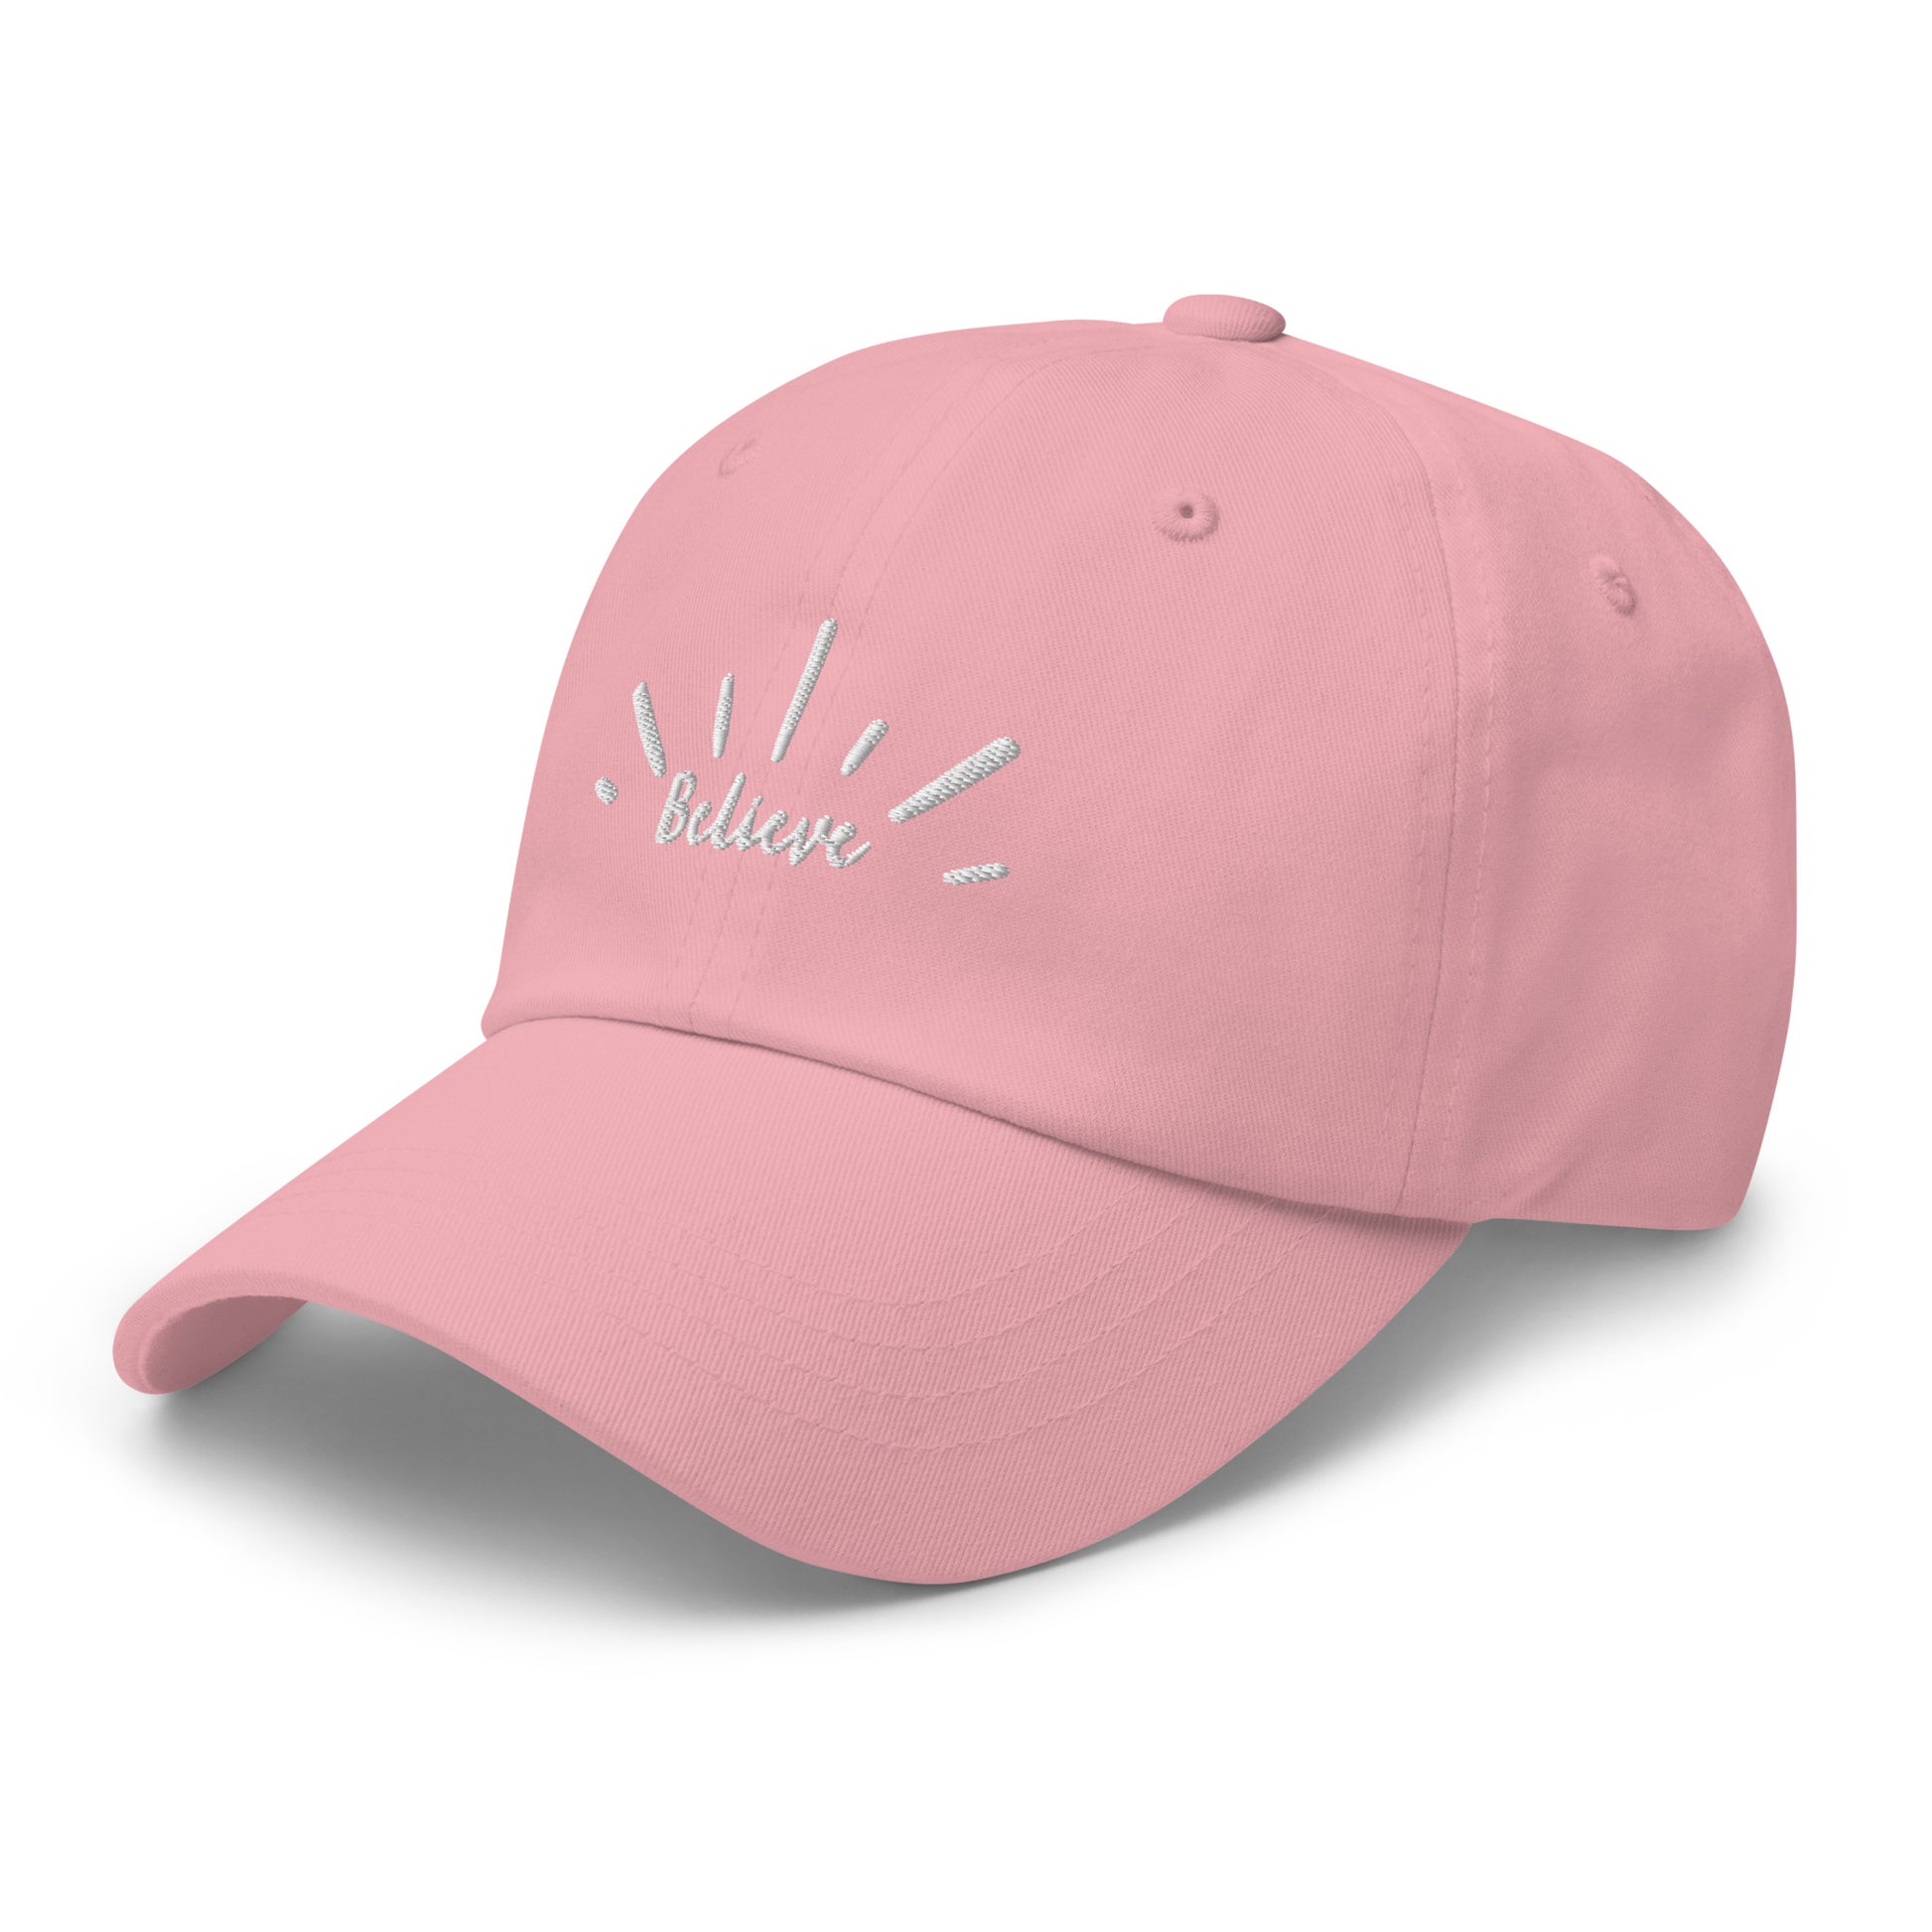 Believe Hat - Friends of the Faith